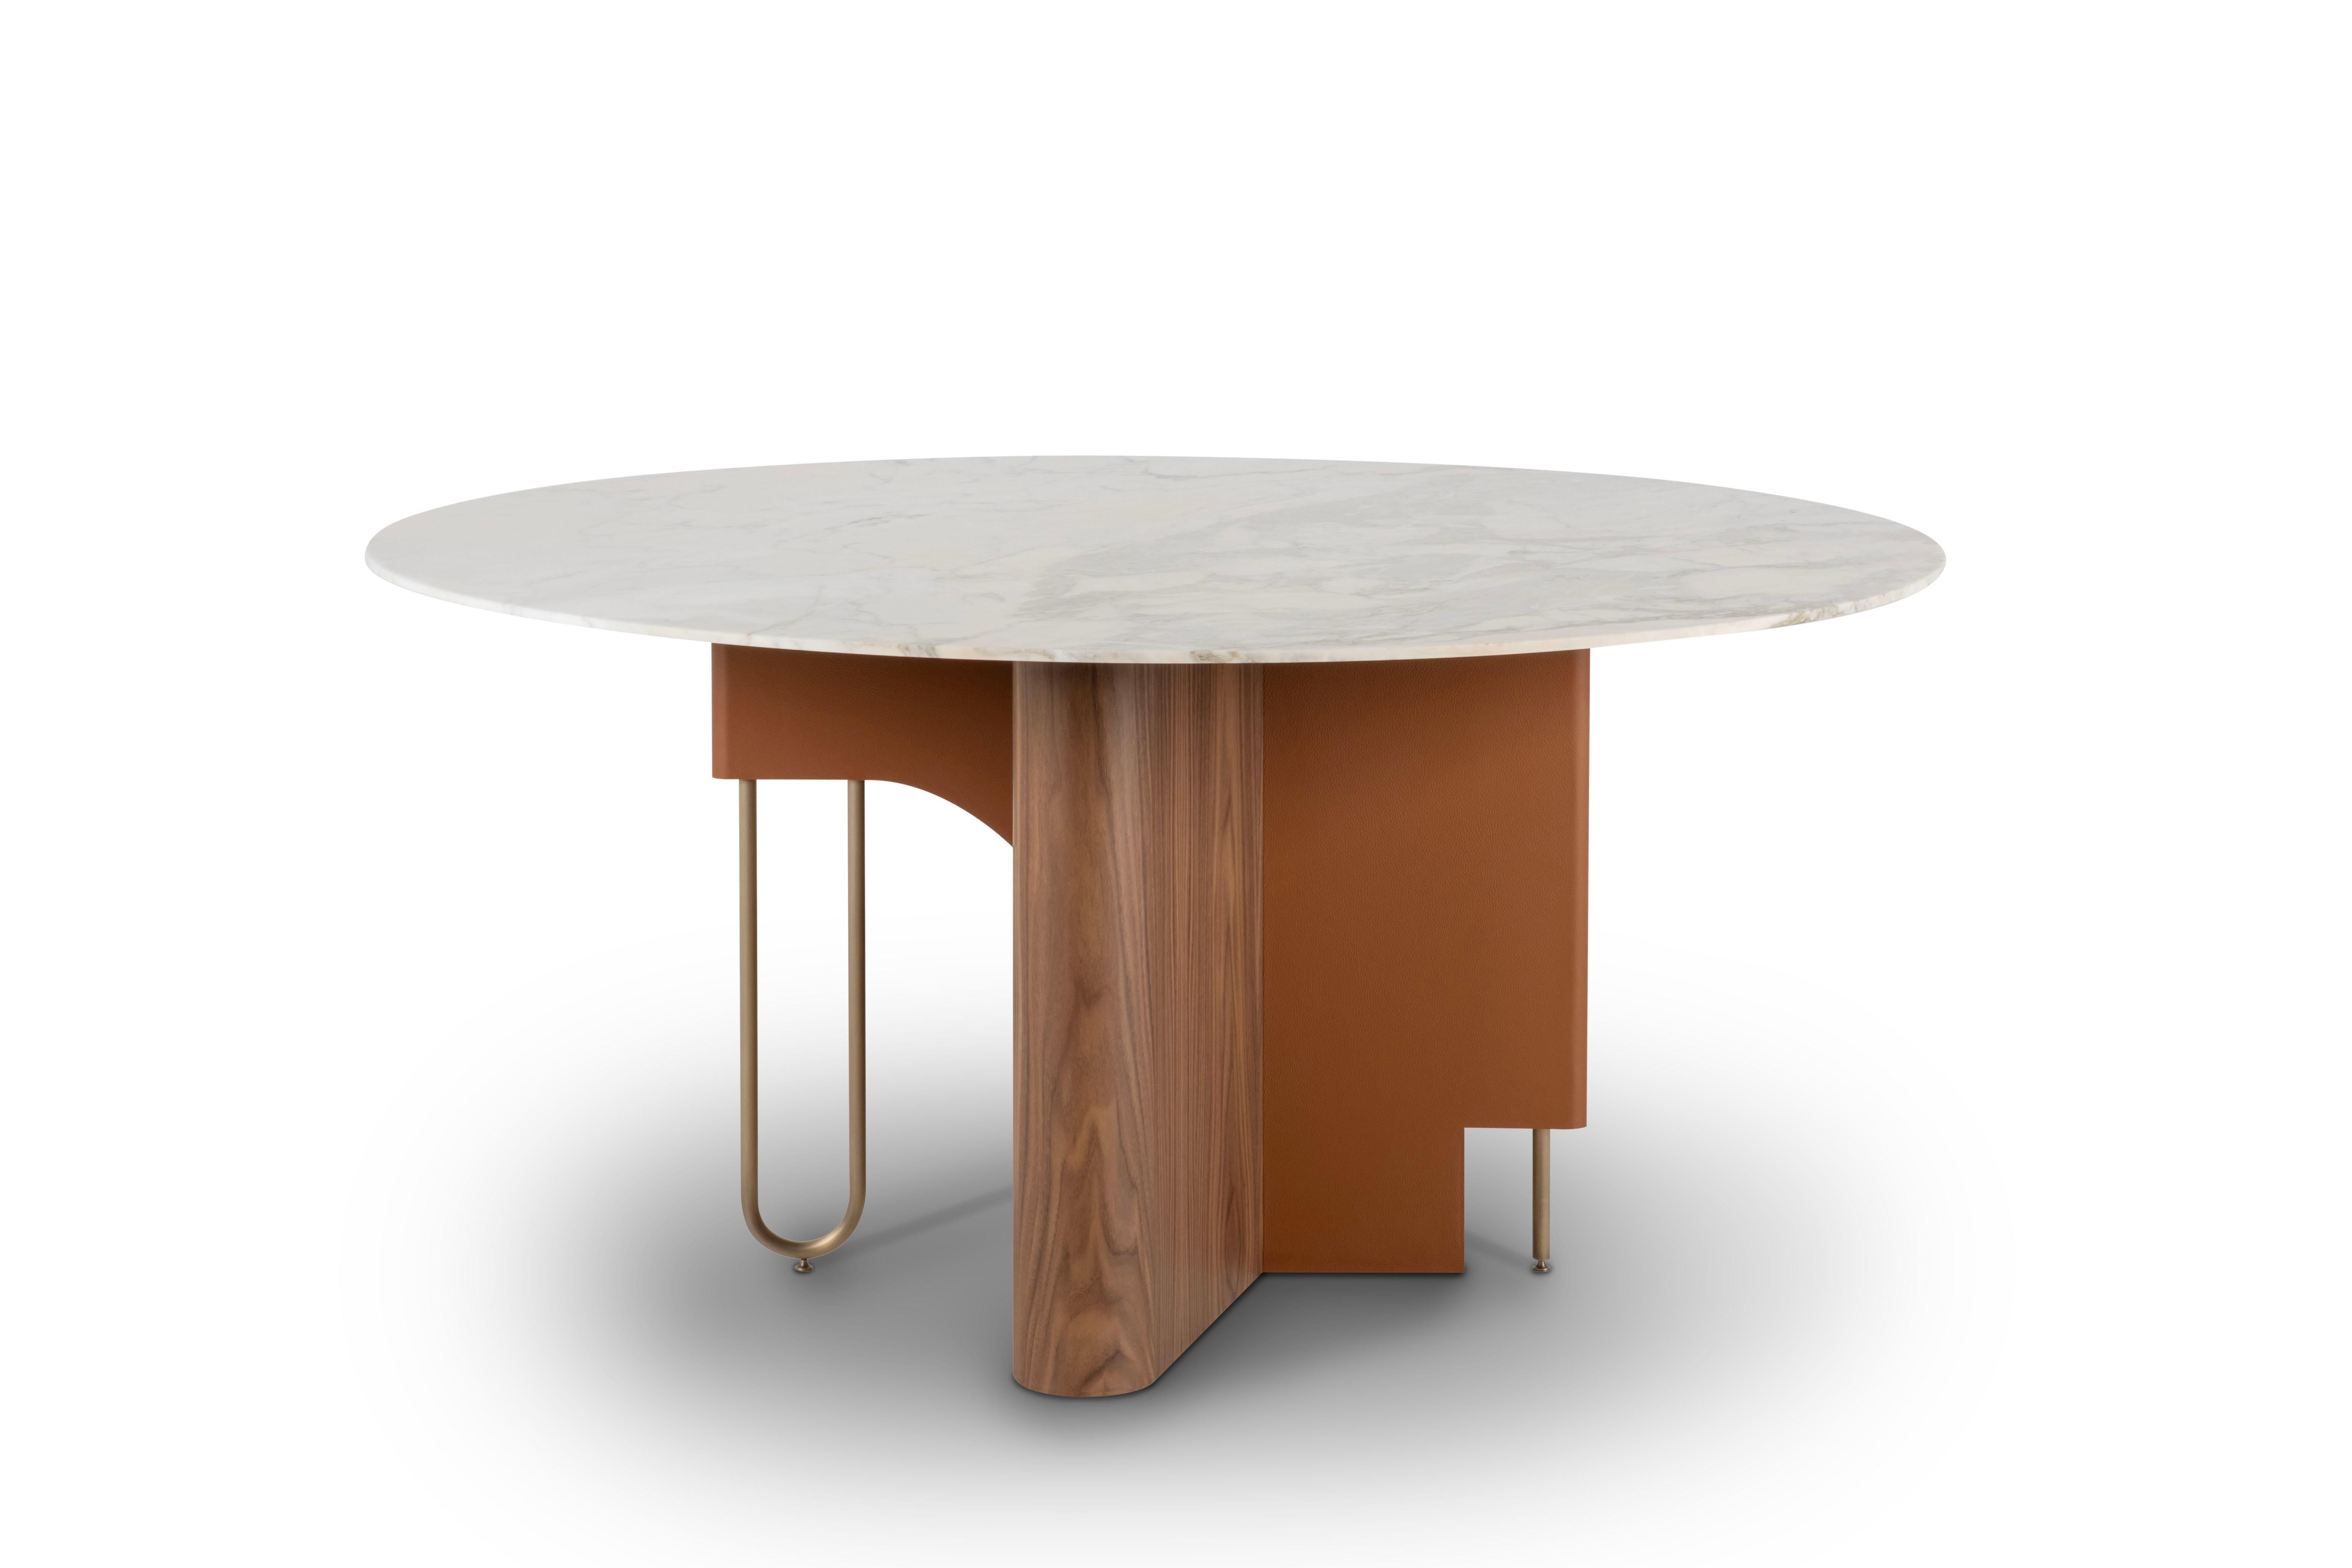 Ferreirinha dining table, Contemporary Collection, handcrafted in Portugal - Europe by Greenapple.

The Ferreirinha marble dining table pays homage to the lasting legacy of Antónia Adelaide Ferreira, a visionary businesswoman who defied the